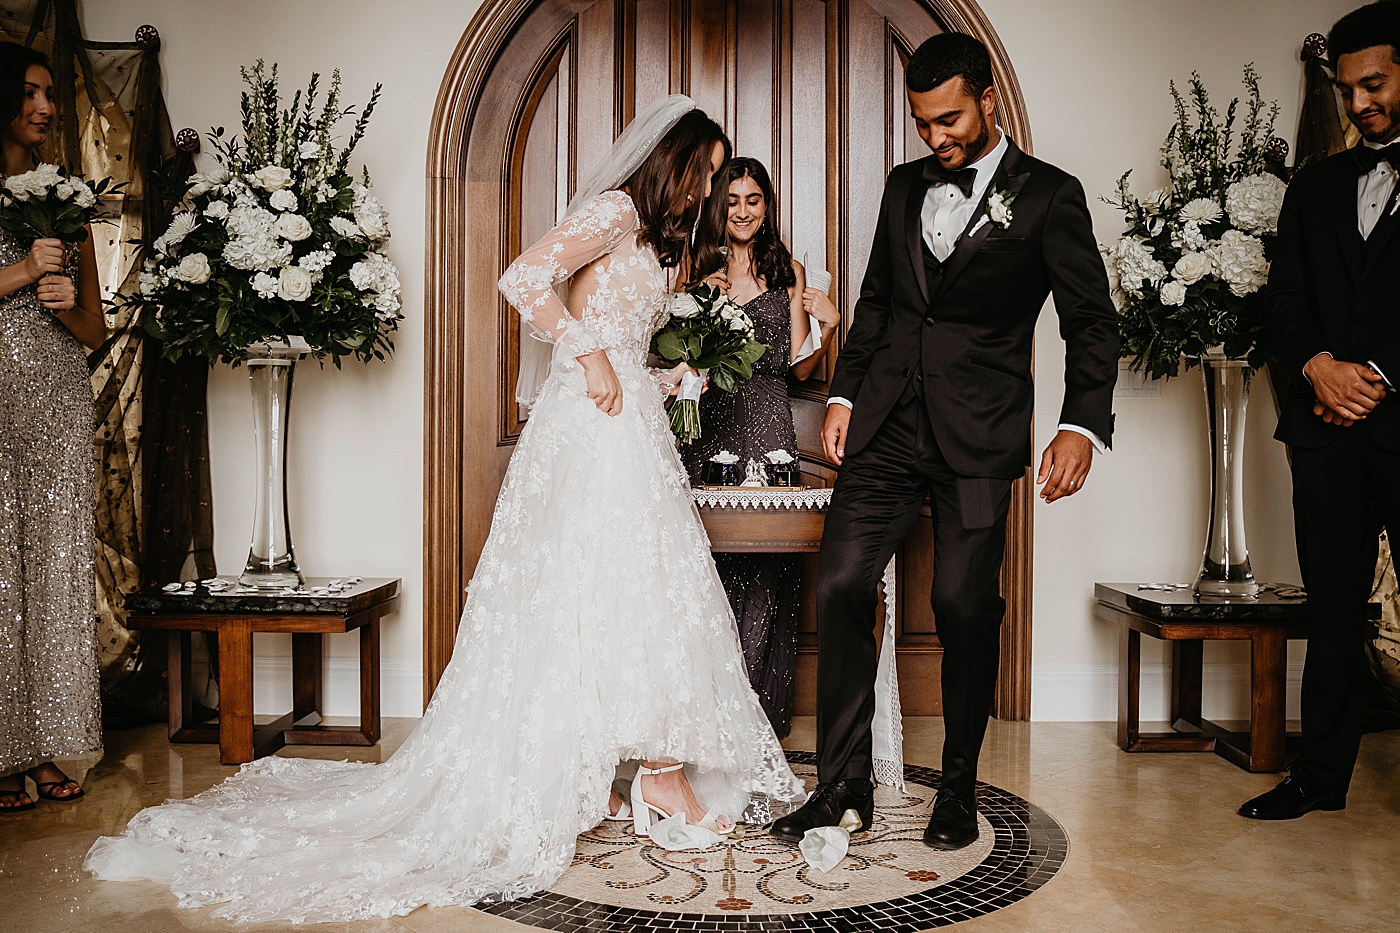 Bride and Groom having a fun moment during ceremony Intimate Home Wedding captured by South Florida Wedding Photographer Krystal Capone Photography